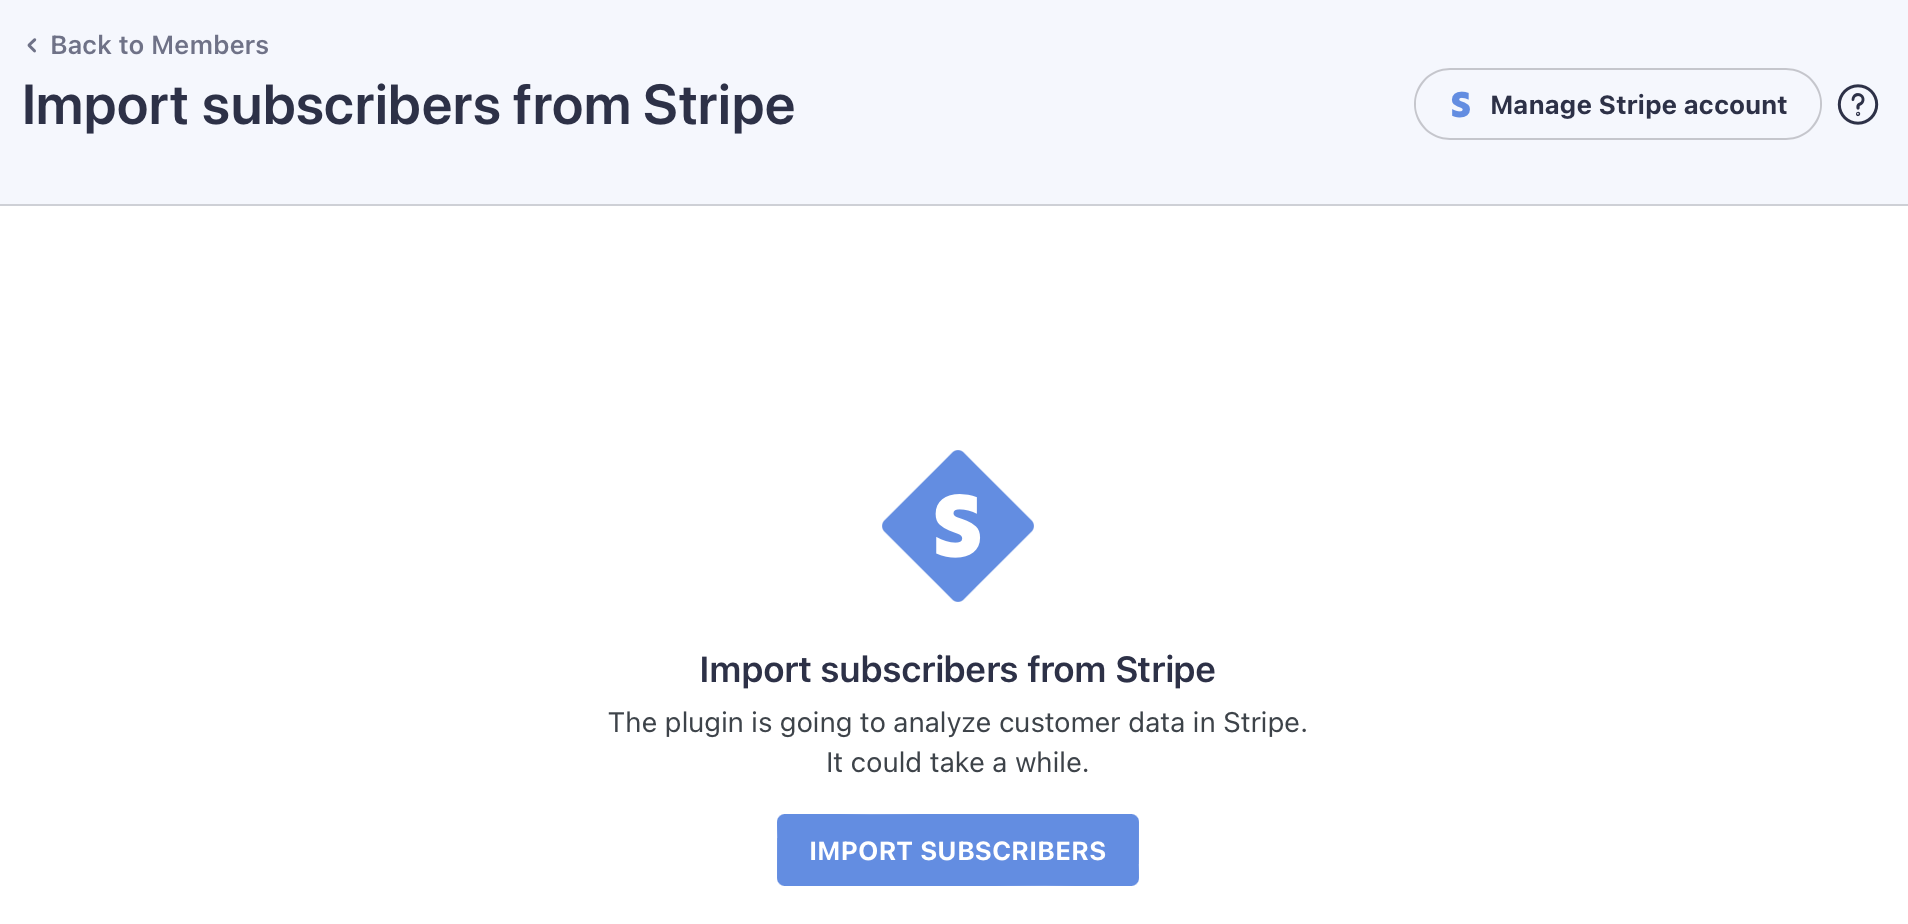 WP Full Stripe Members - Import subscribers from Stripe welcome page